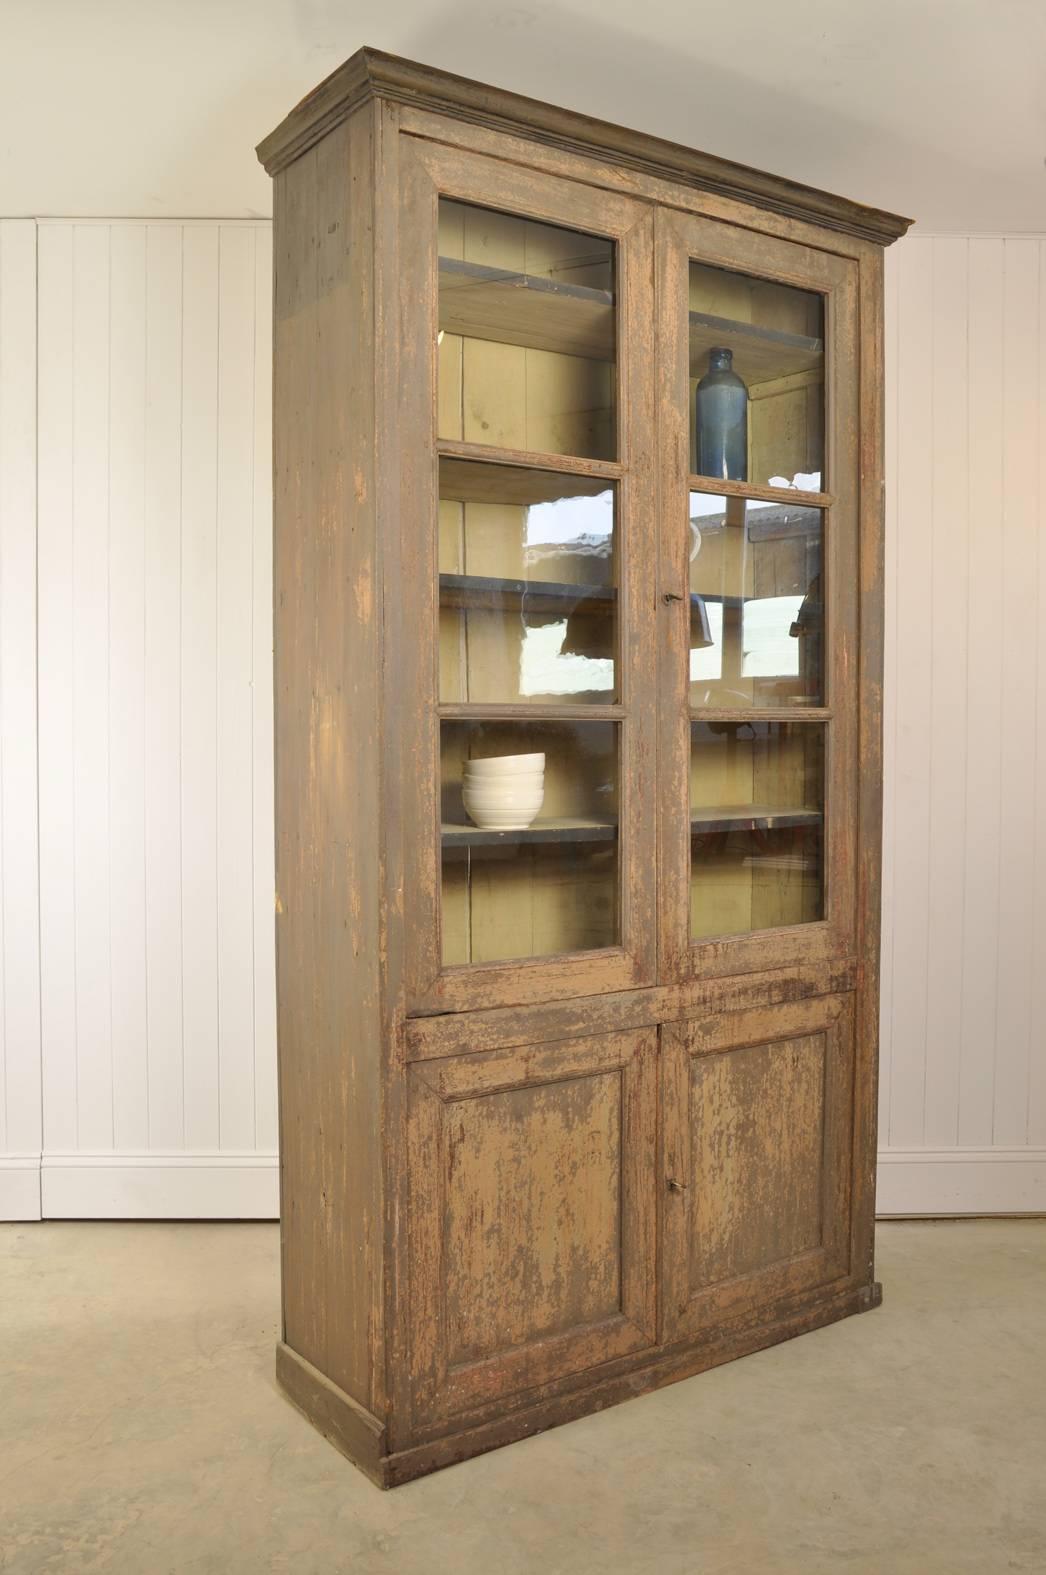 Sourced near Marseille, South of France, this painted bookcase is circa 1880. 

It has been washed back to reveal these older layers of paint which produces this lovely finish.

Some of the glass is original with a lovely texture, having been